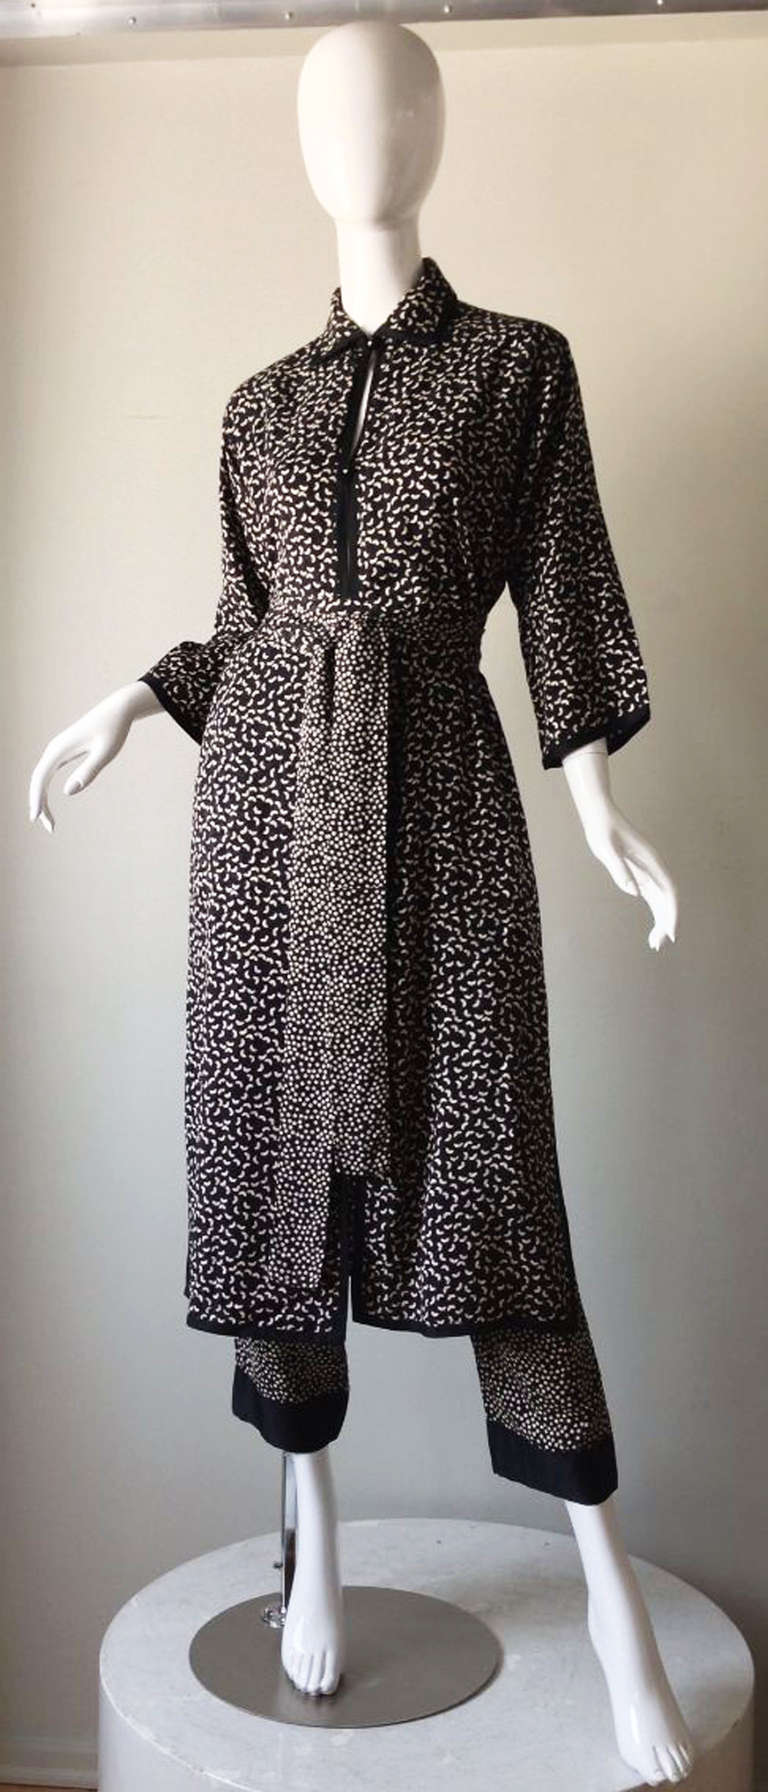 A fine and rare vintage Yves Saint Laurent haute couture ensemble. Fine white on black silk jacquard print fabric items include a tunic (button front) and trousers and matching sash belt. Pristine.